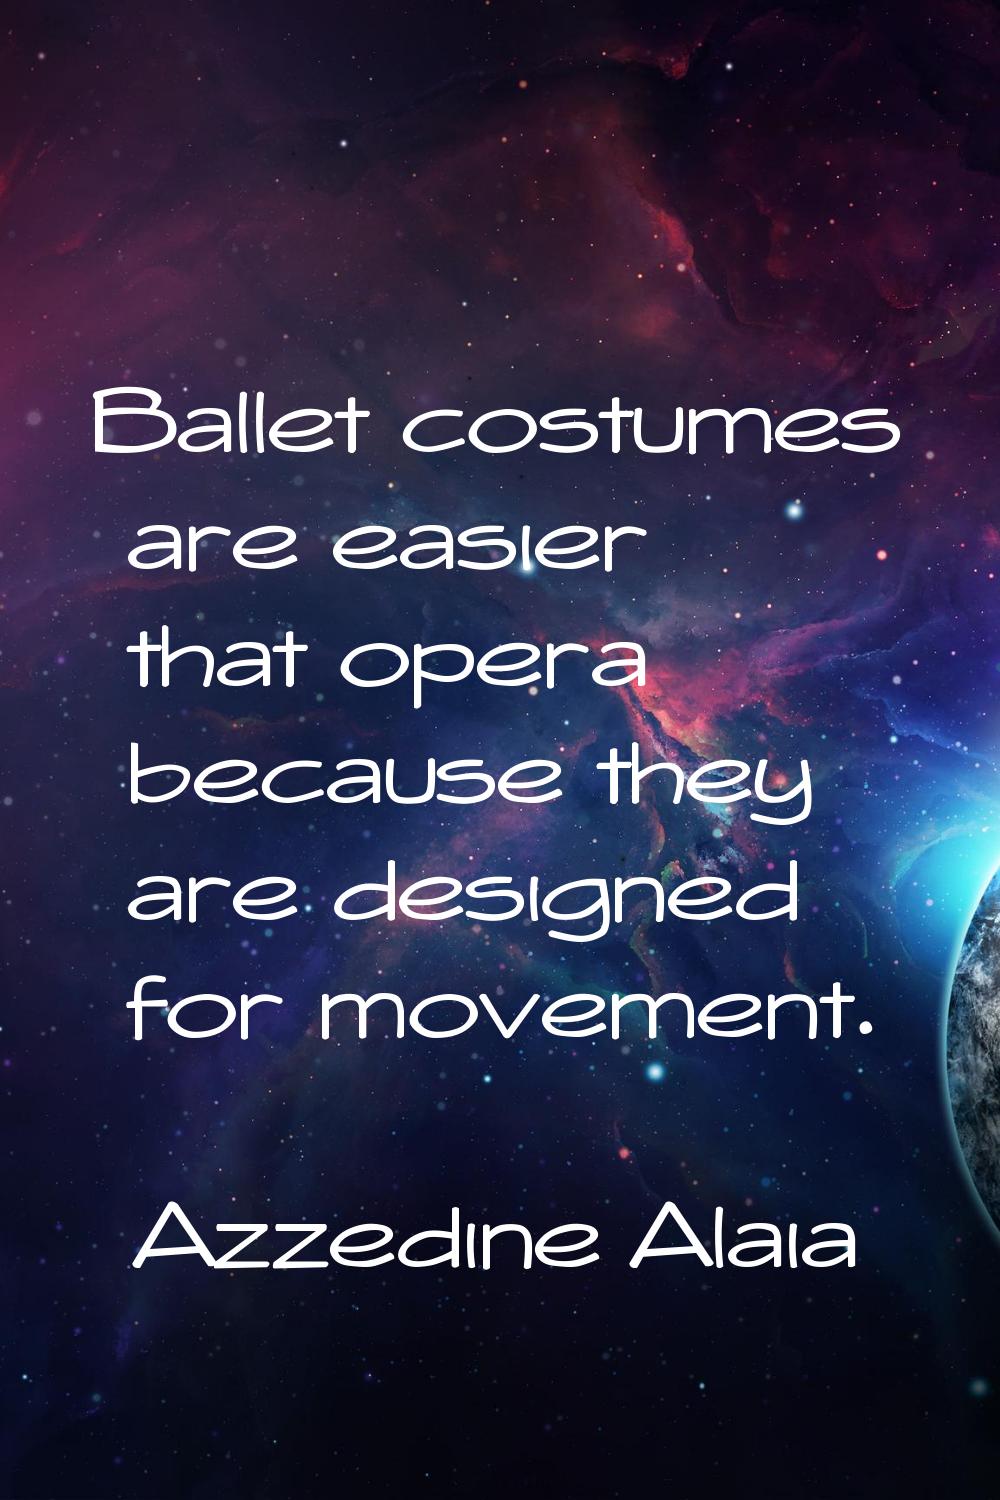 Ballet costumes are easier that opera because they are designed for movement.